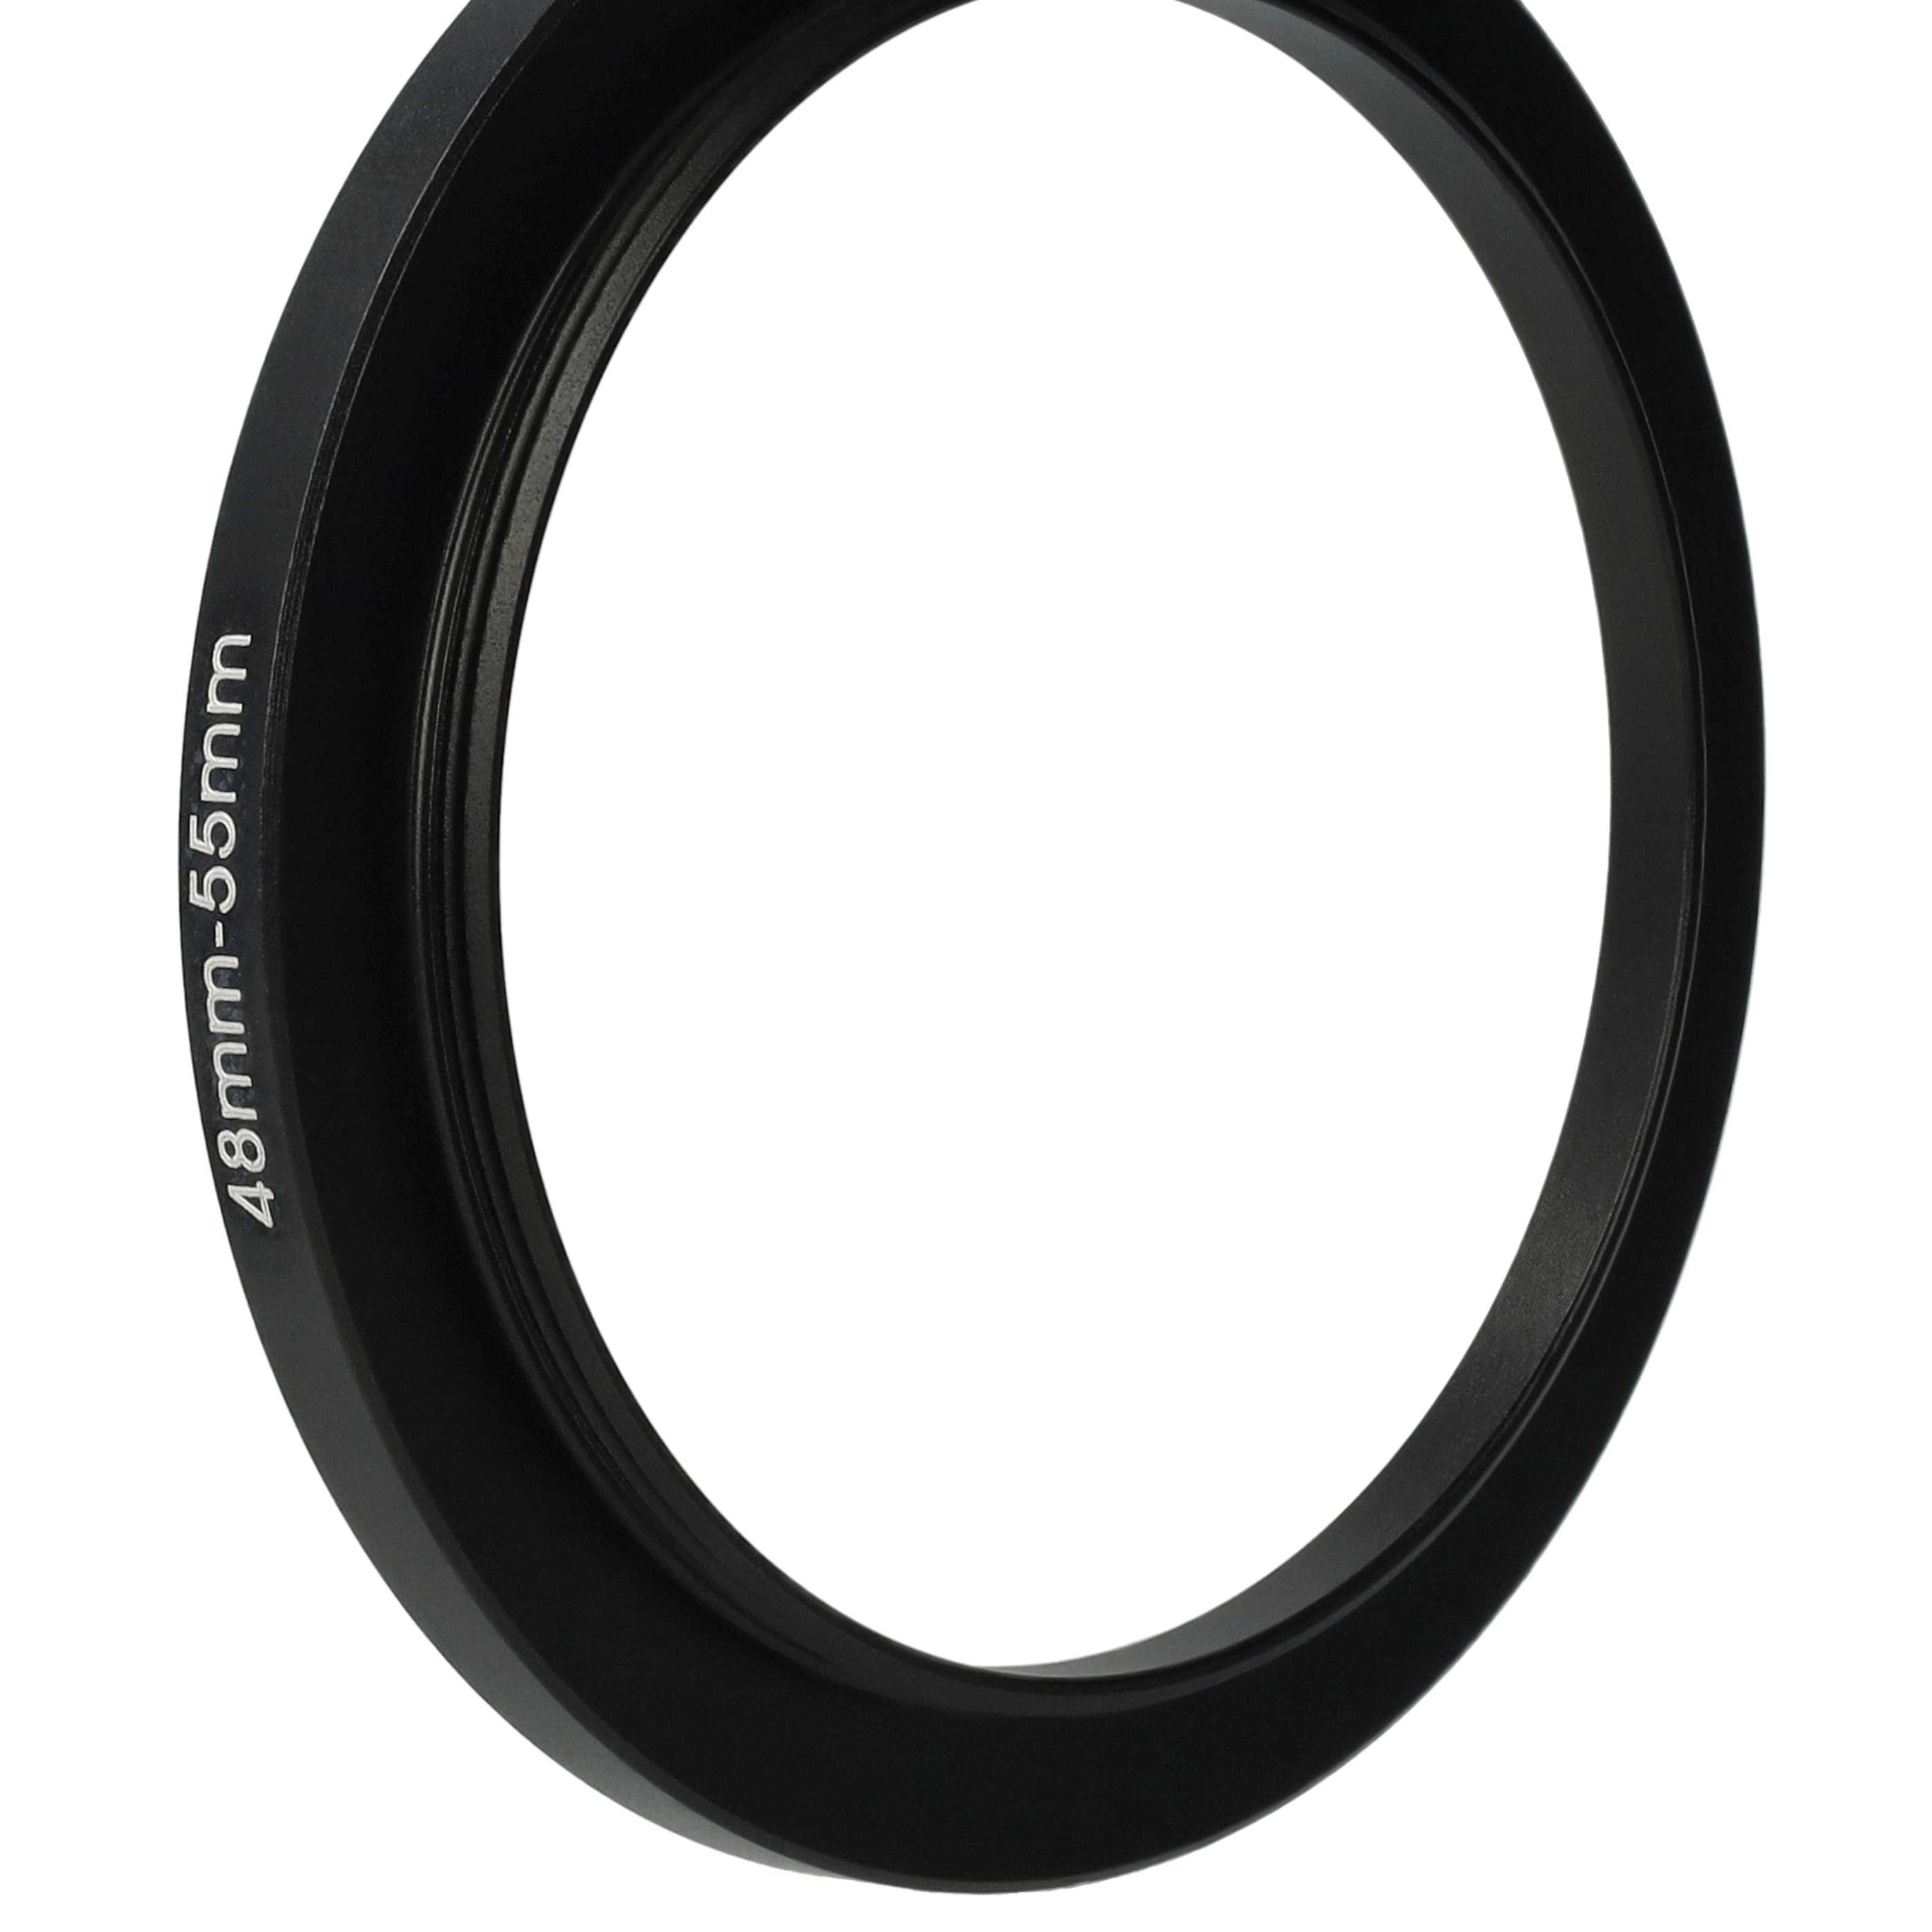 Step-Up Ring Adapter of 48 mm to 55 mmfor various Camera Lens - Filter Adapter